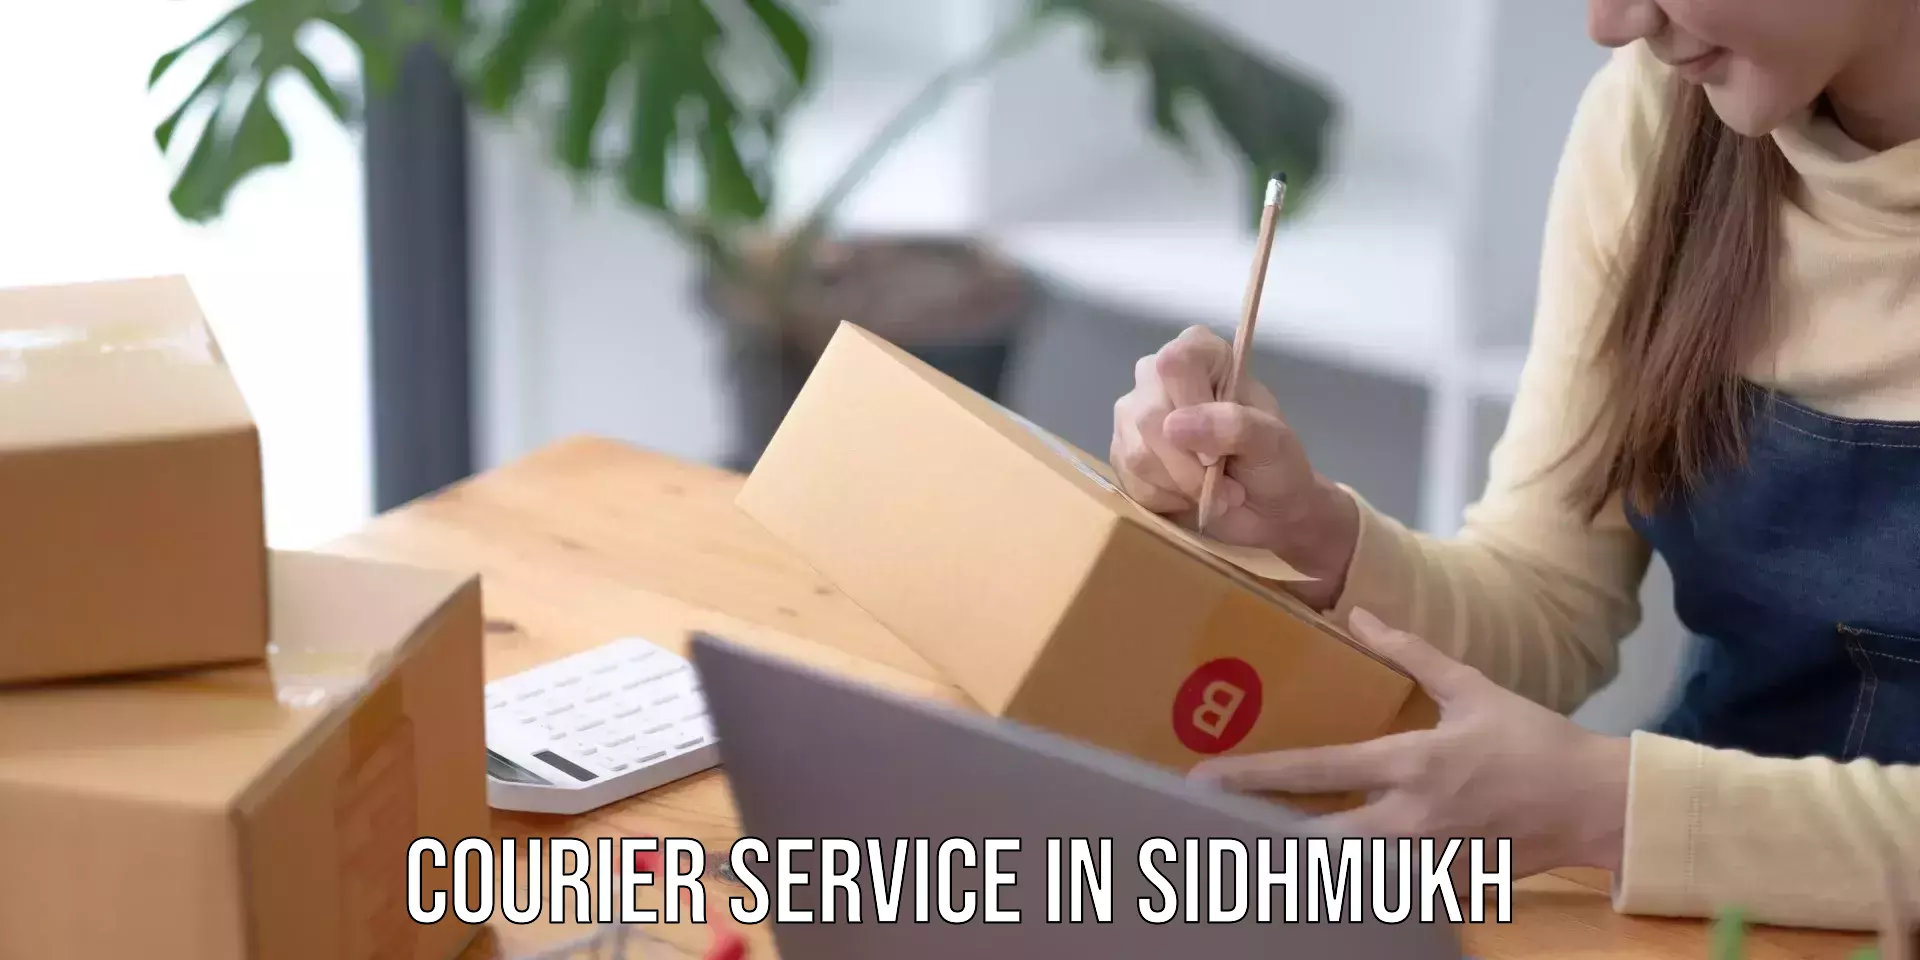 Multi-service courier options in Sidhmukh